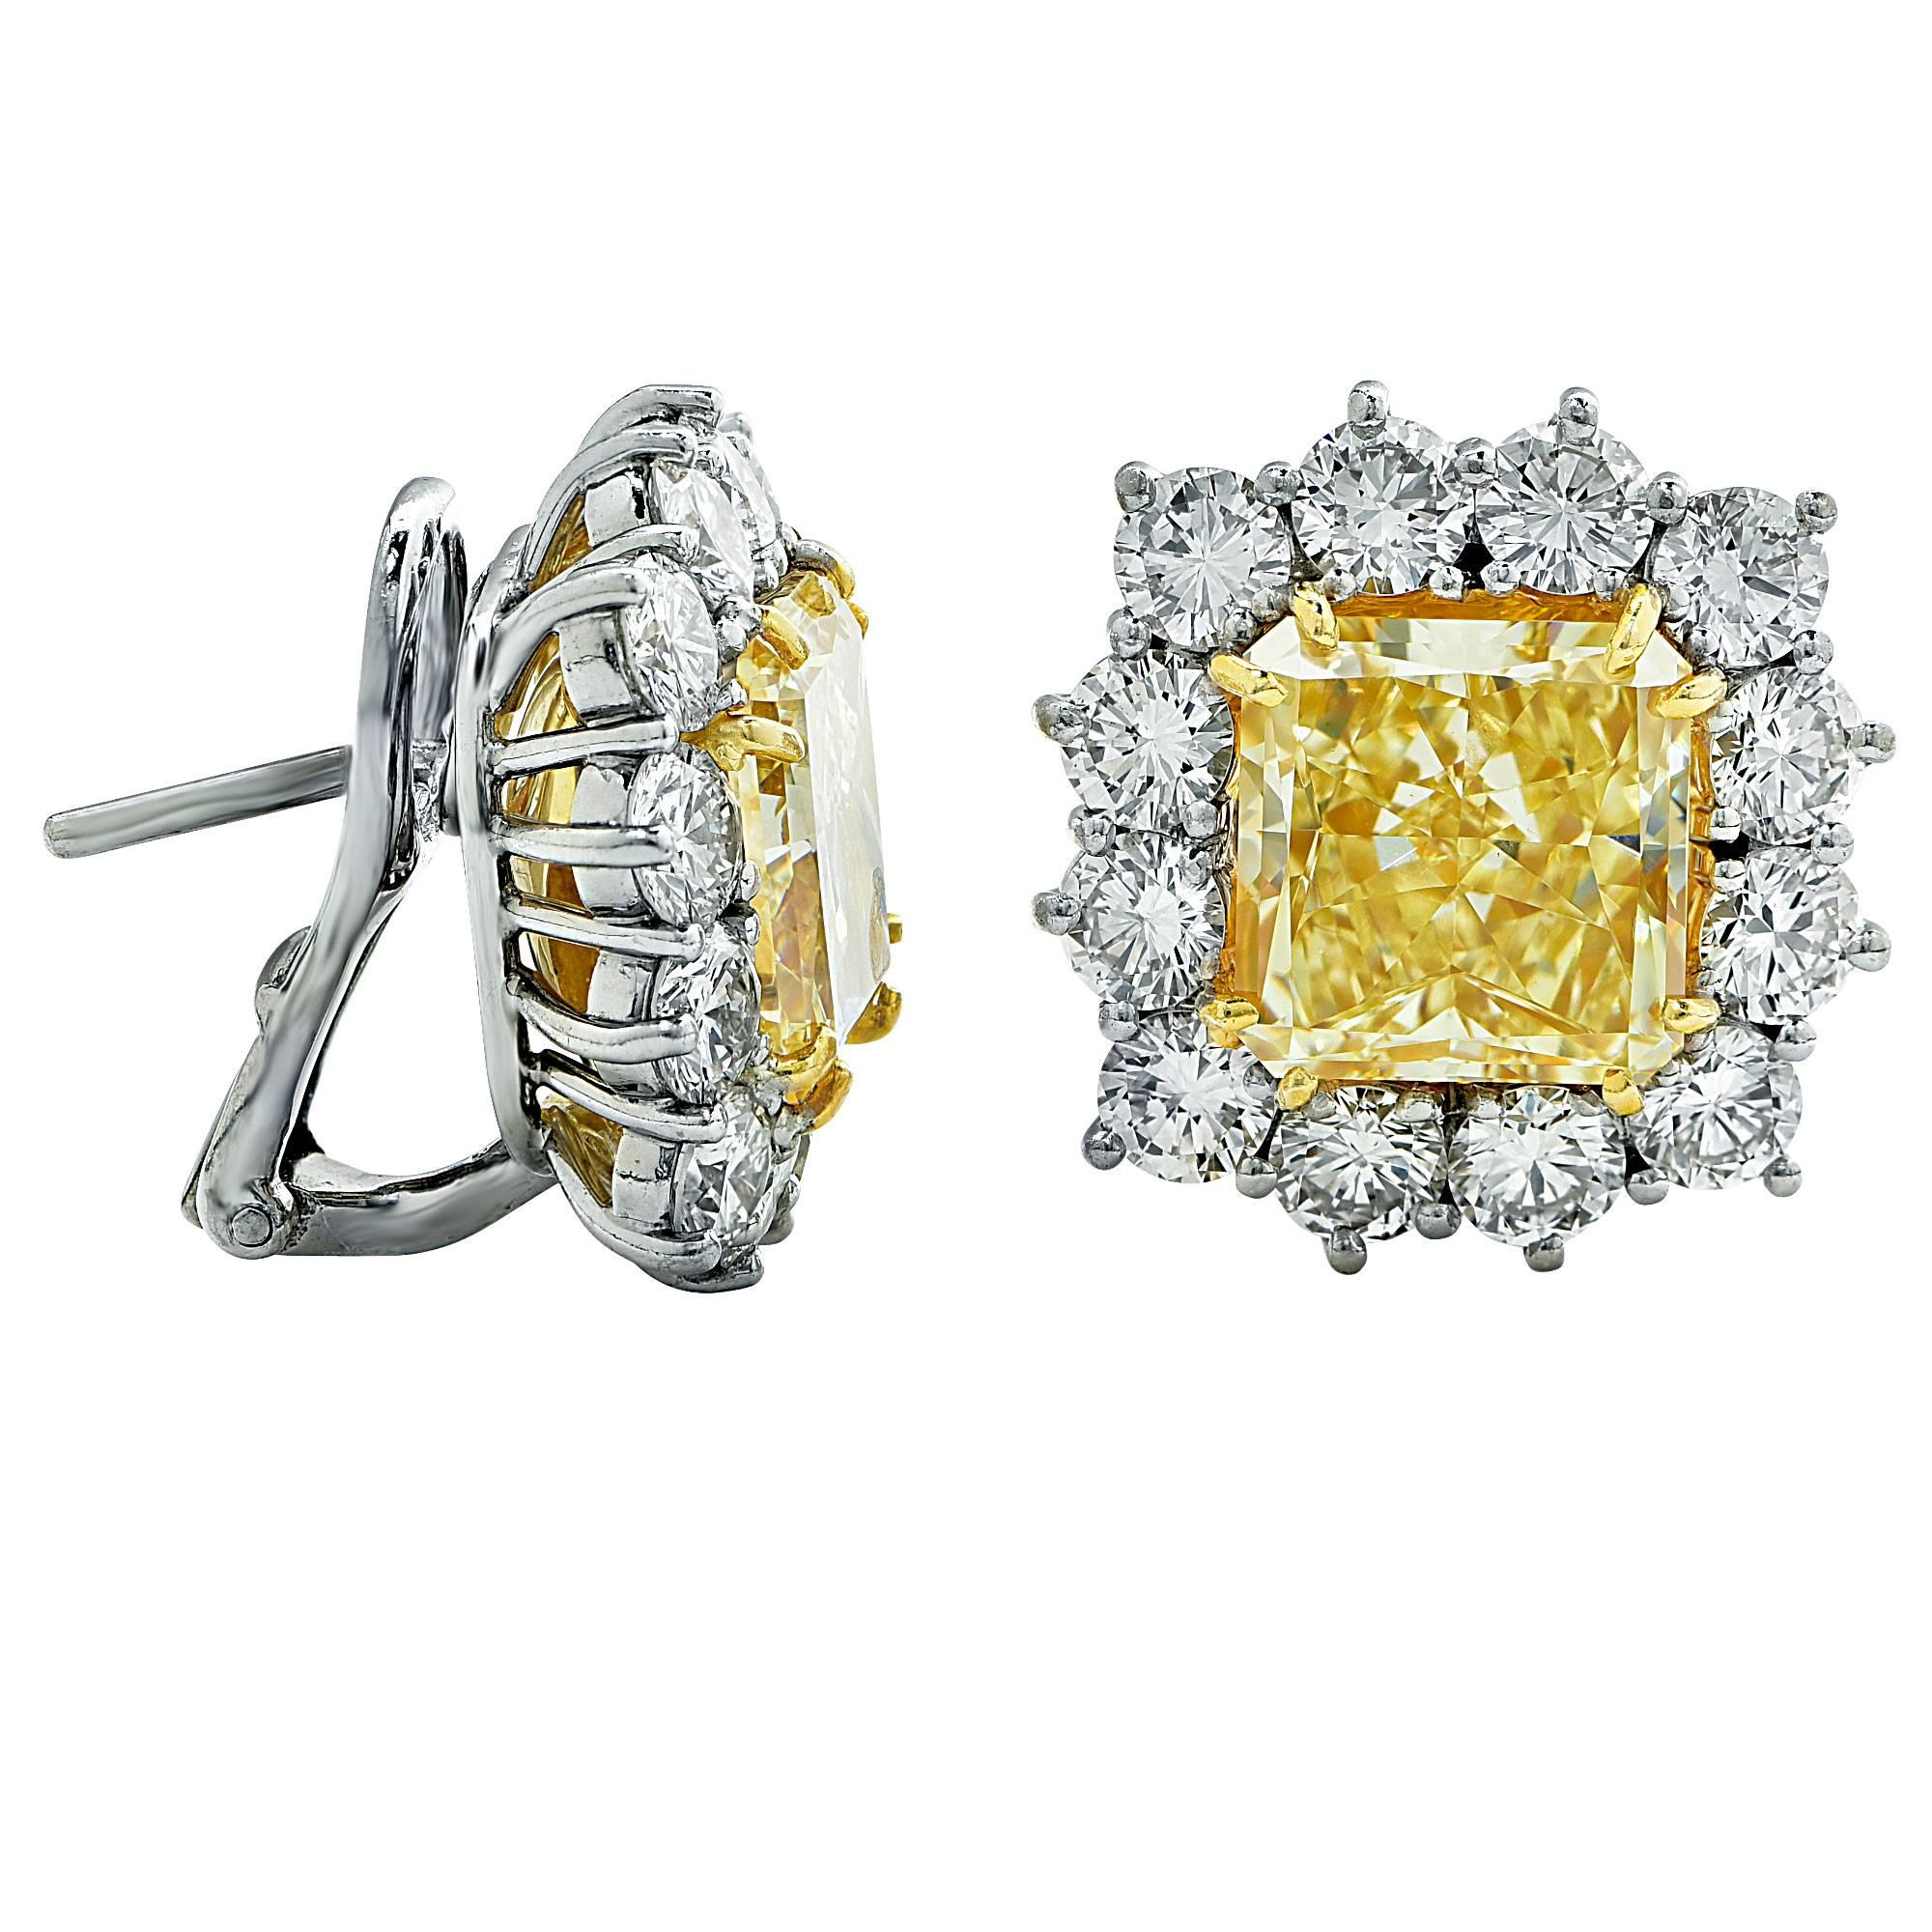 Magnificent pair of GIA graded 5.36ct and 5.01ct fancy light yellow radiant cut diamonds VS1 clarity set in to custom made platinum and 18k yellow gold earrings. These dazzling yellow diamonds are surrounded by 24 round brilliant cut diamonds